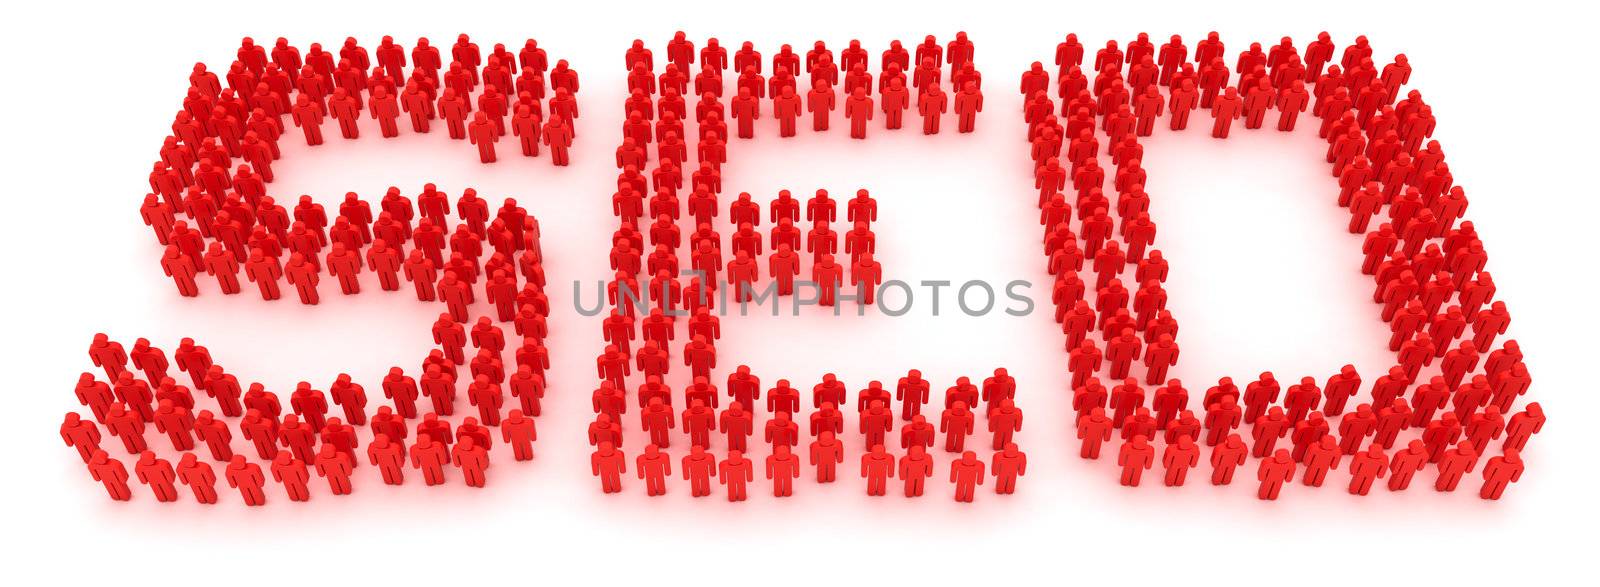 Word SEO formed by crowd of people